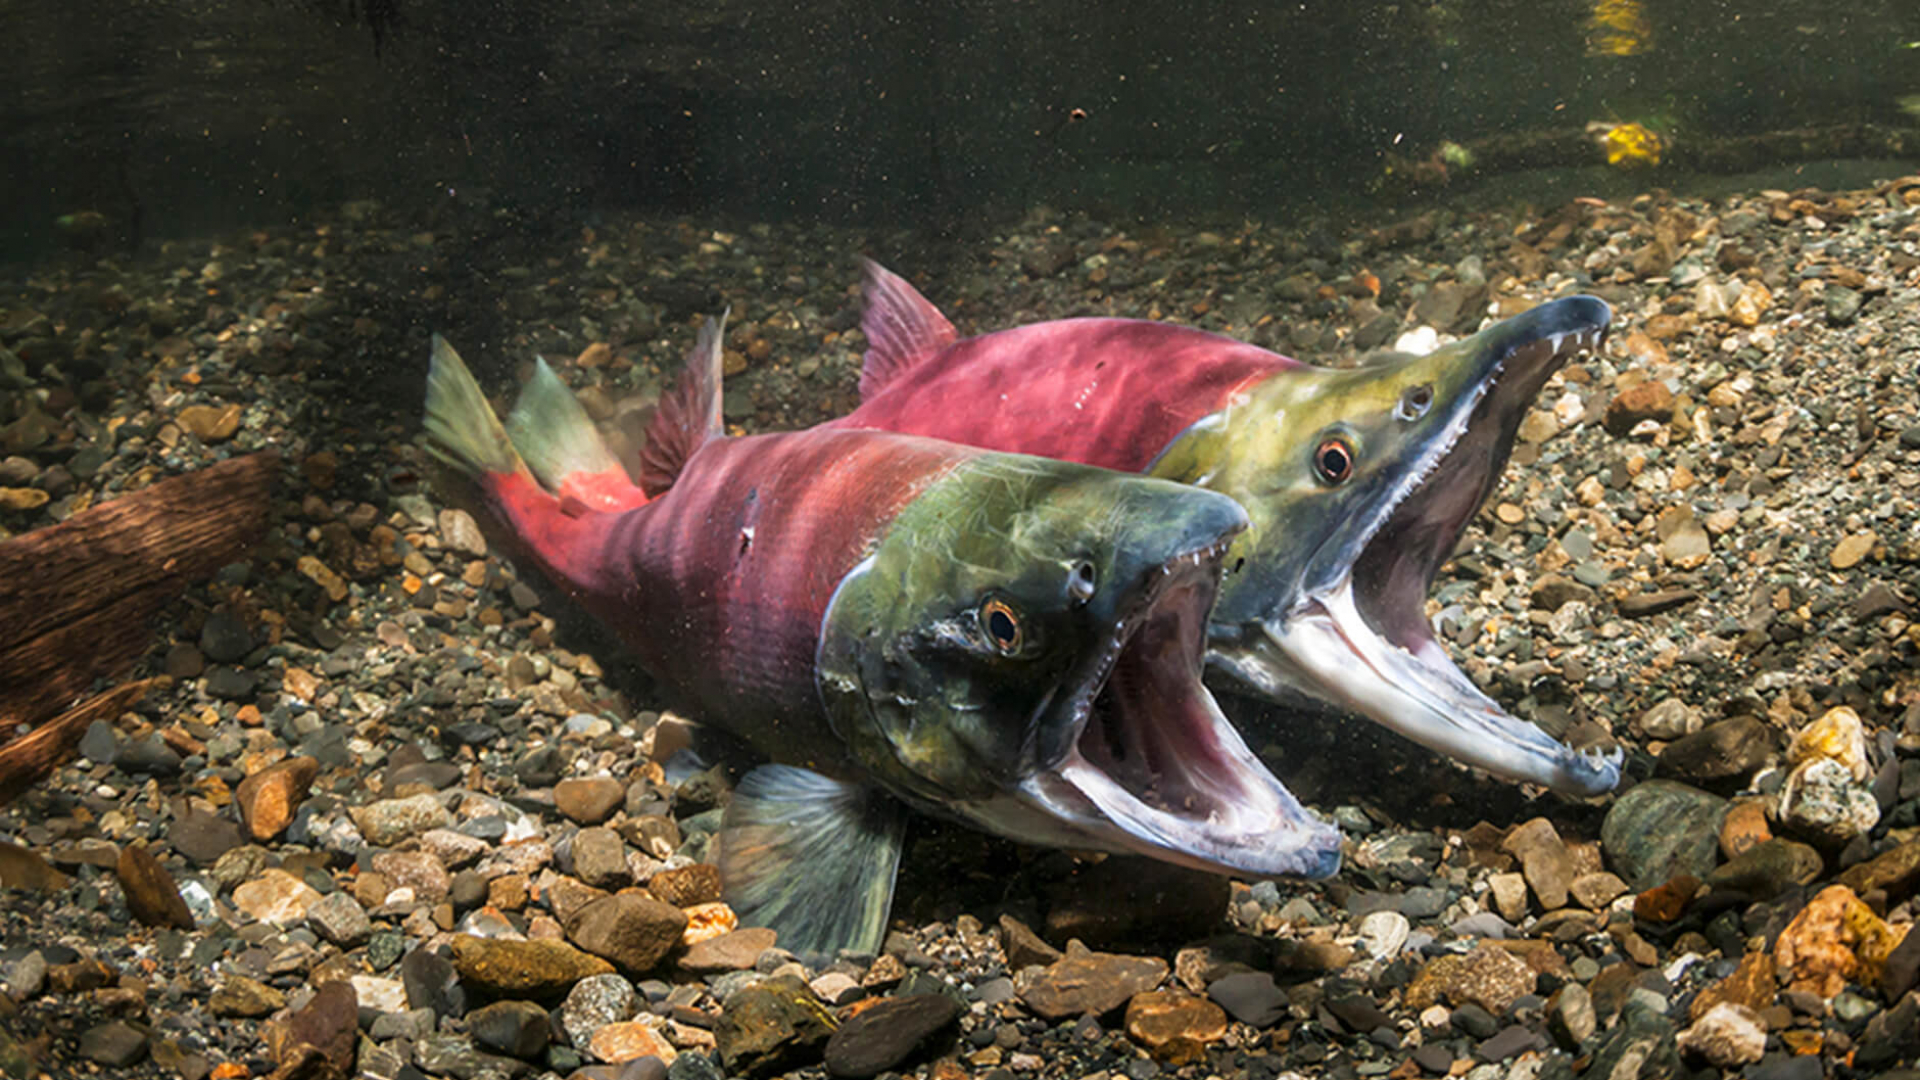 Sockeye salmon, female on the left and male on the right, in the nest preparing to spawn.